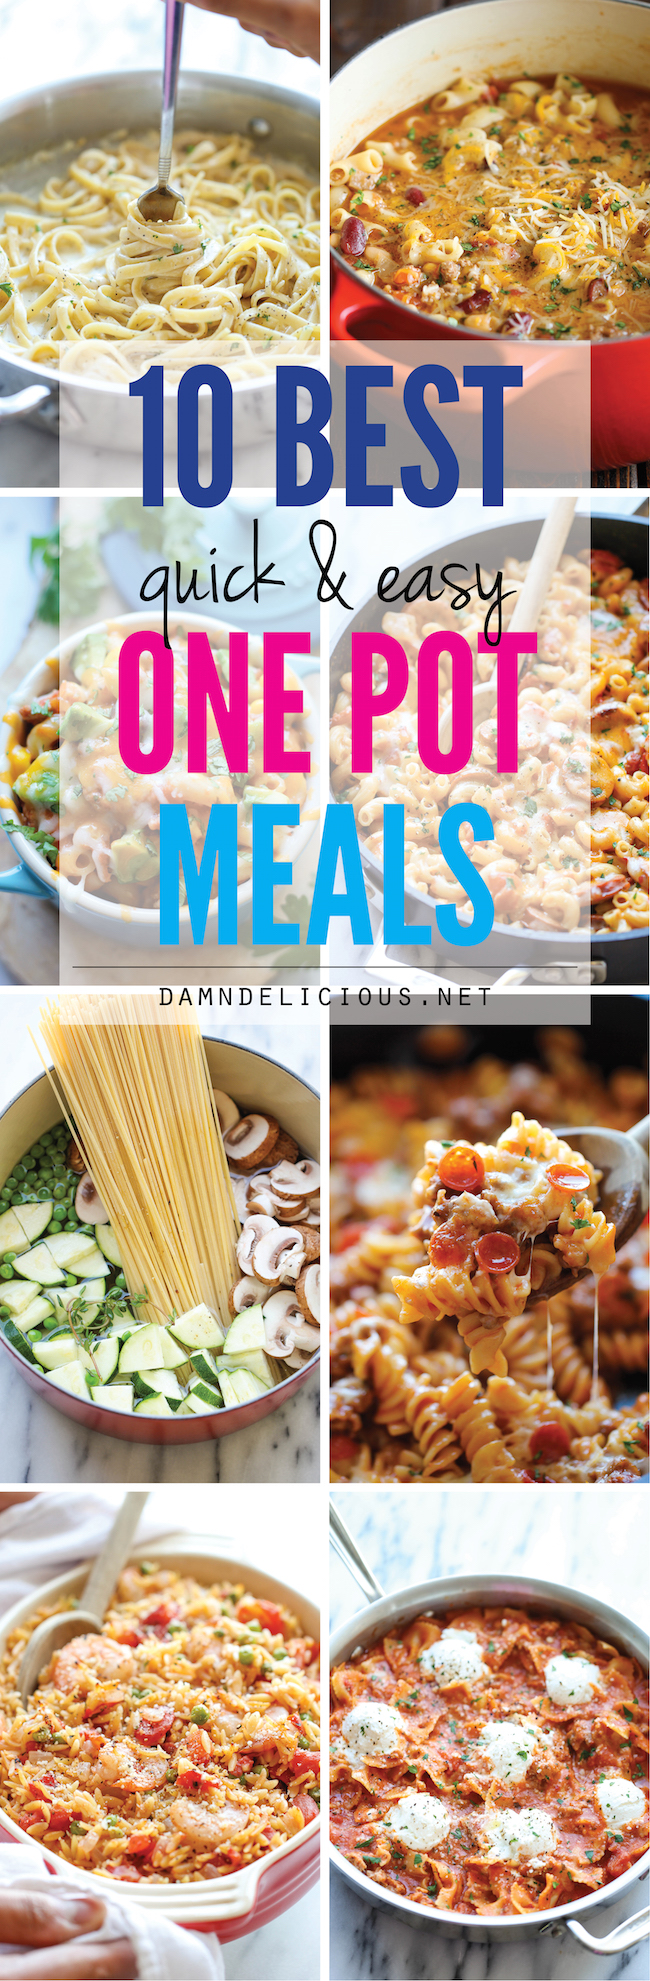 10 Quick and Easy One Pot Meals - Damn Delicious